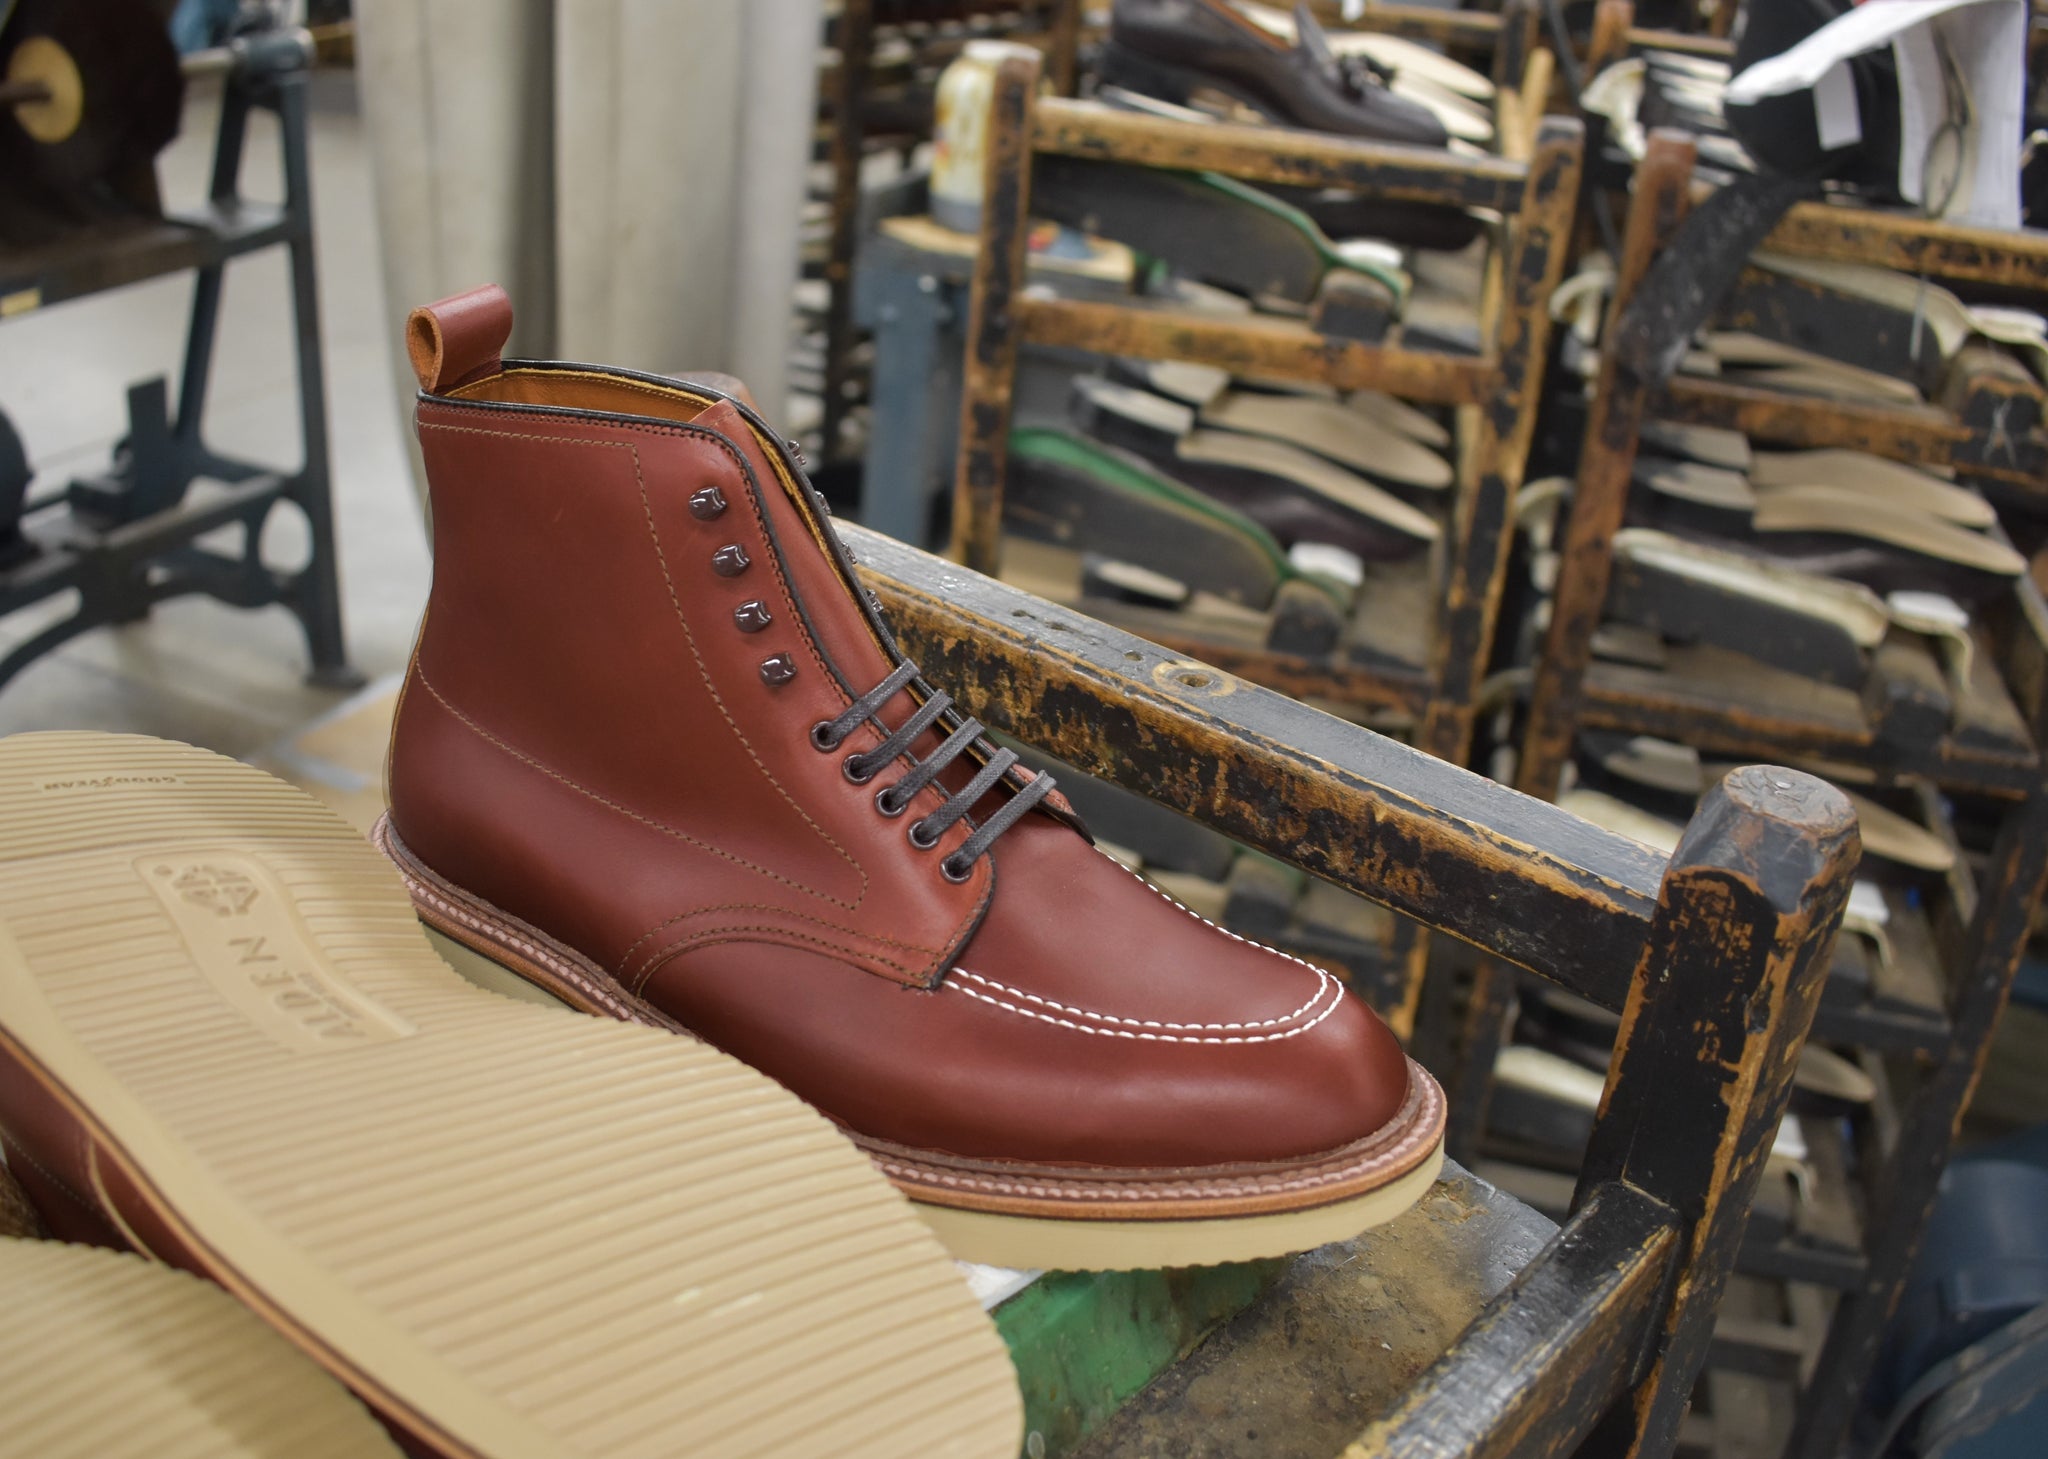 Alden Shoes Classic Indy 405 Boot on Wedge Work Sole